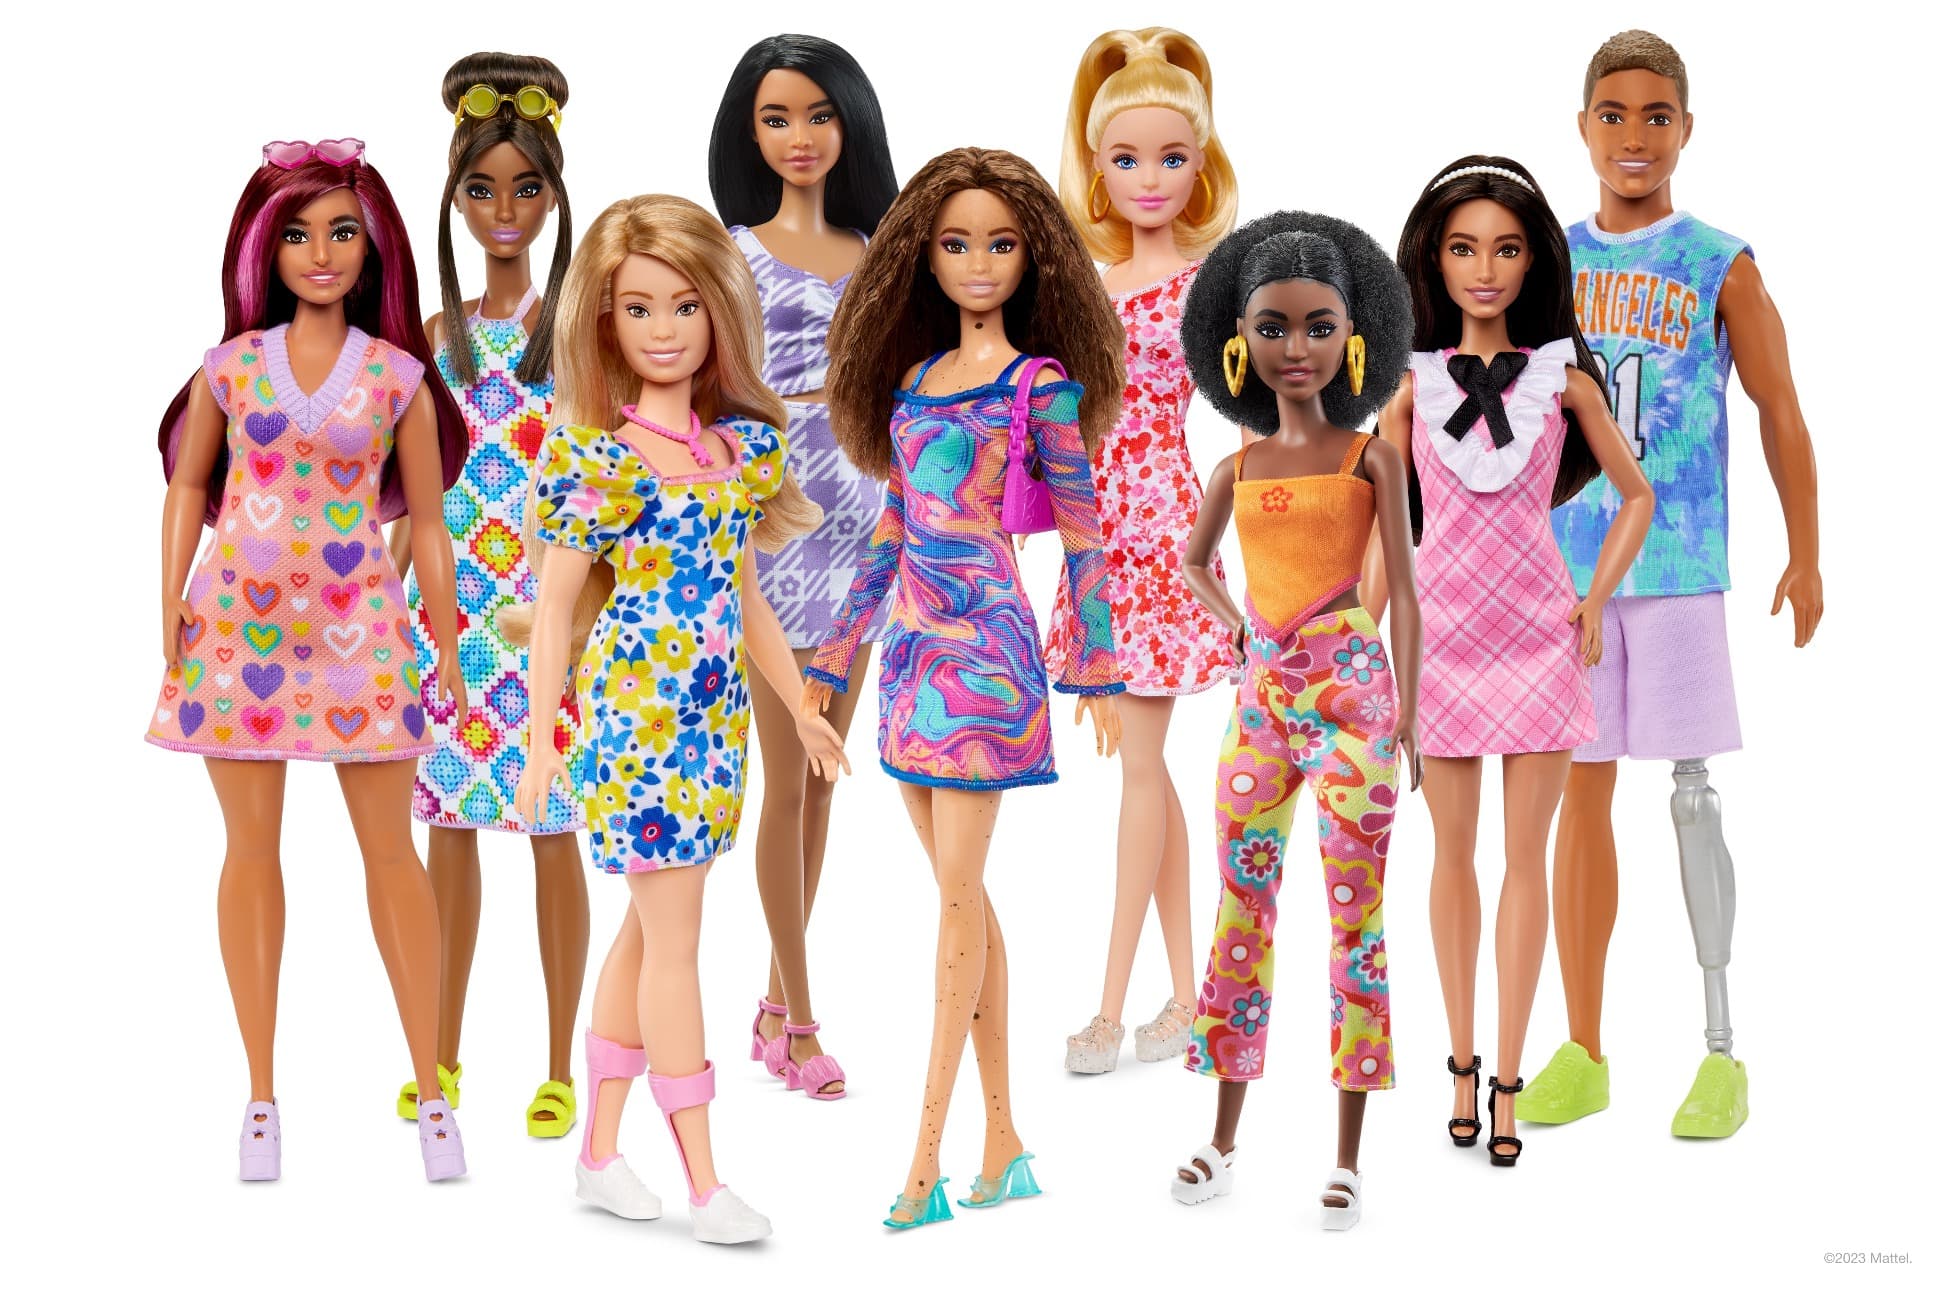 Group photo of the Fashionista line, including the new Barbie Down Syndrome Doll